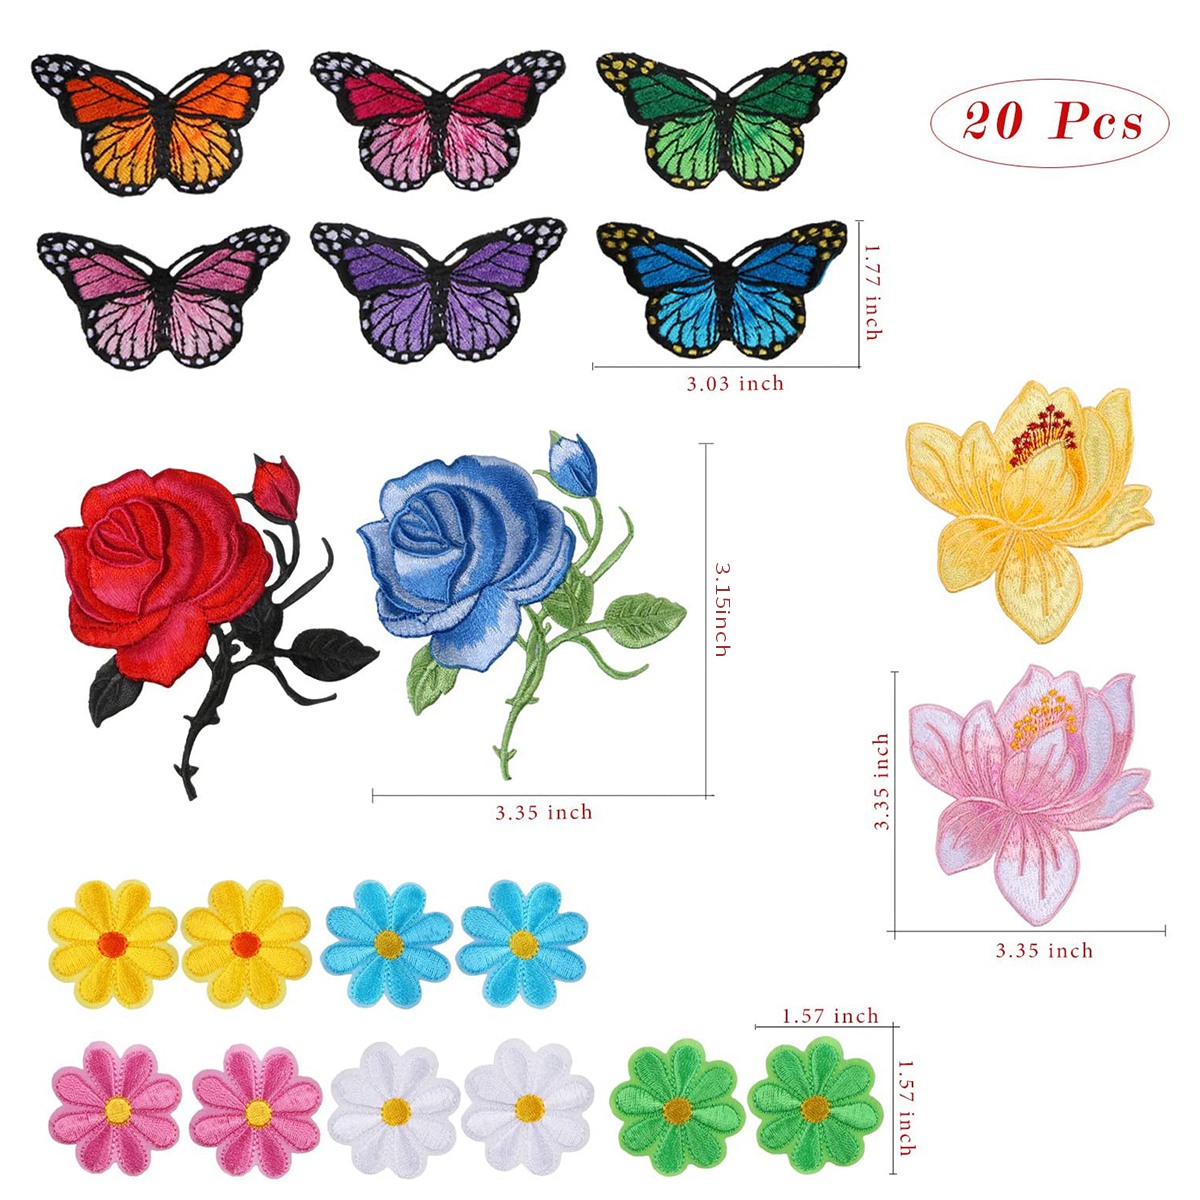 ckepdyeh 20 Pcs Flowers Butterfly Iron on Patches Sew on Embroidery Applique Patches for Arts Crafts DIY Decor,Jeans,Jackets,Bags - image 4 of 8